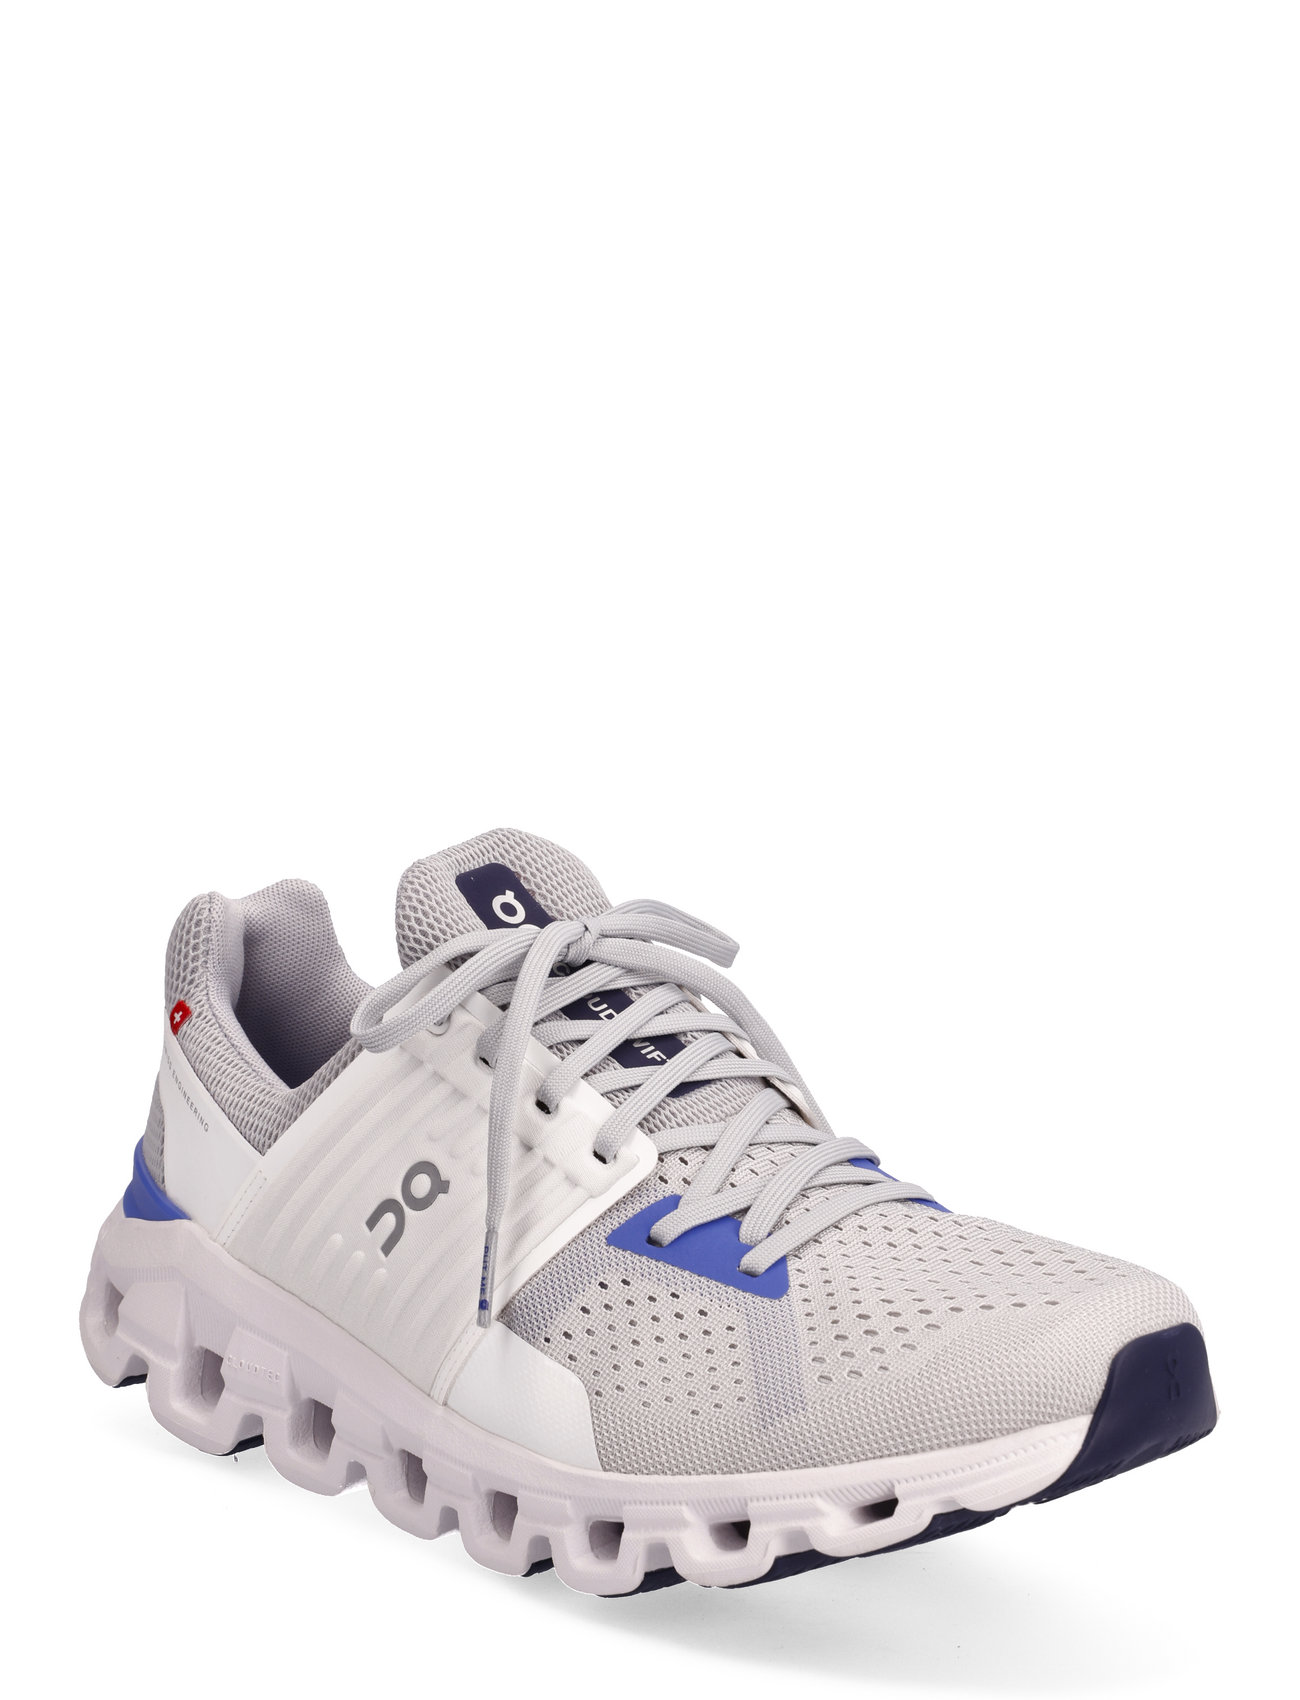 Cloudswift Shoes Sport Shoes Running Shoes Multi/mönstrad On